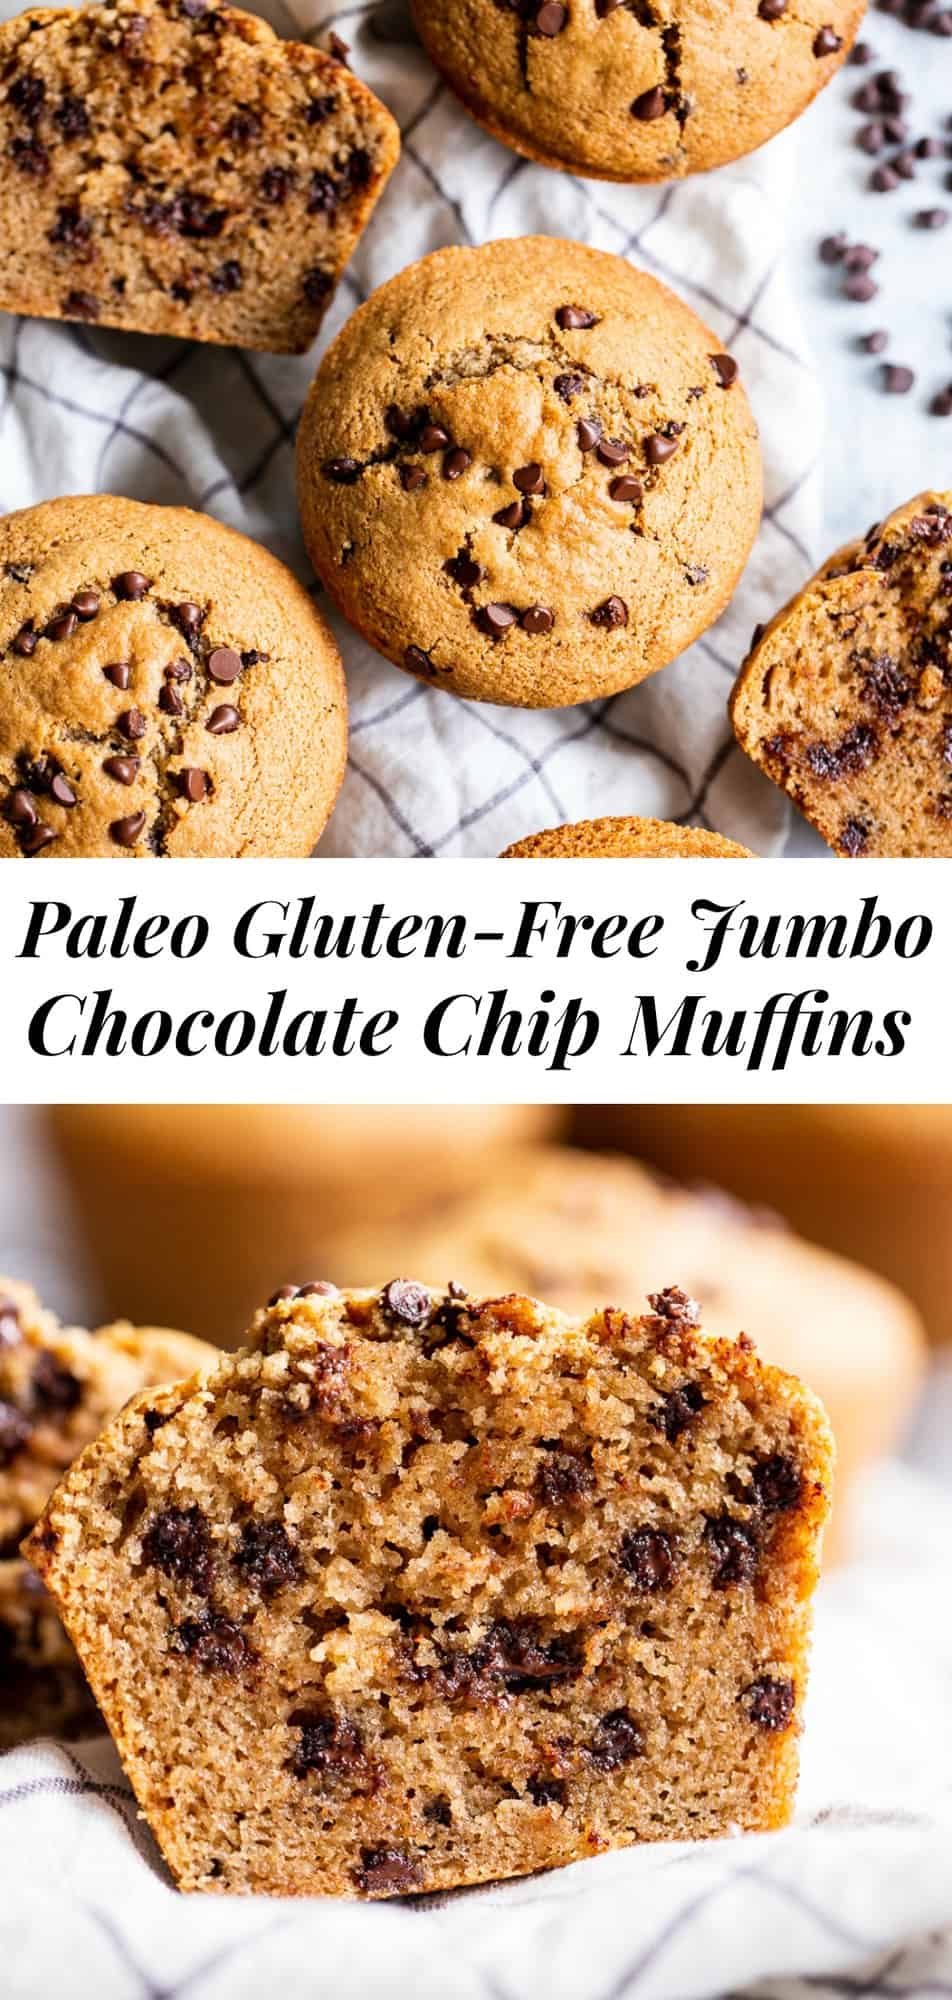 These jumbo chocolate chip muffins are so much fun, insanely delicious and easy to make! No one would ever guess they’re grain free and paleo because they taste just like the real deal. If you don’t have a jumbo muffin pan no worries - you can make them as regular muffins too. #paleo #glutenfree #dairyfree #paleobaking #cleaneating 